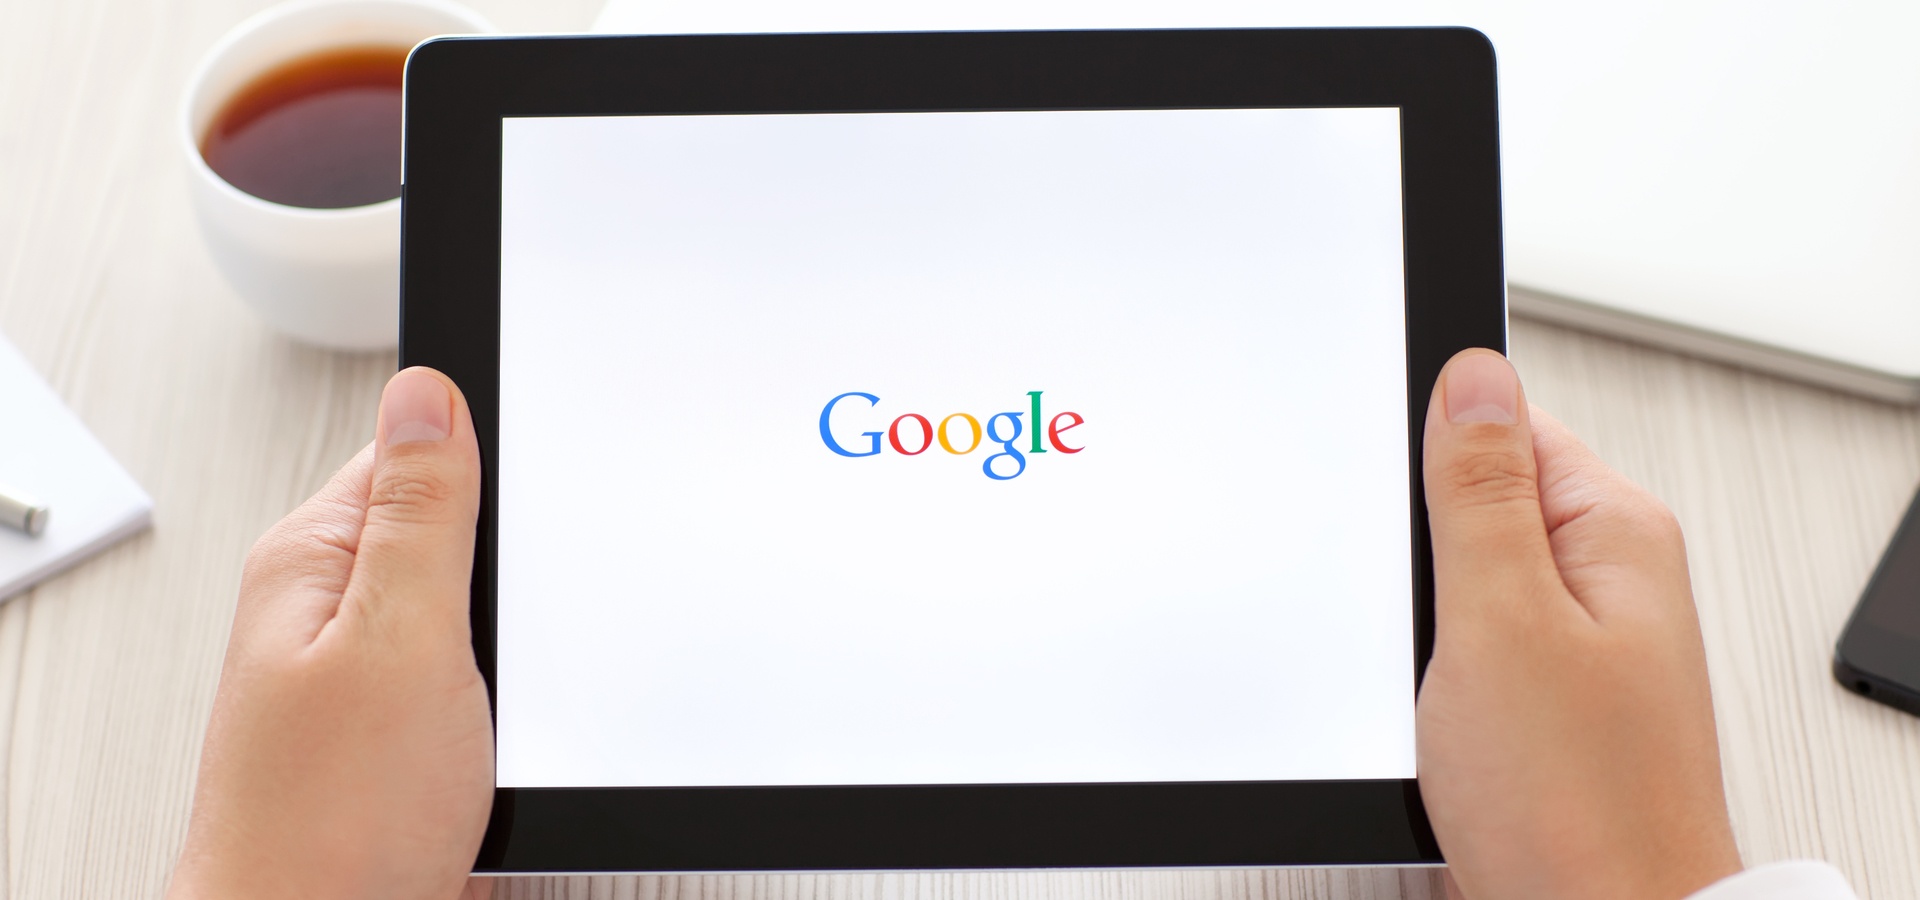 A person holding a computer tablet with the Google logo on the screen